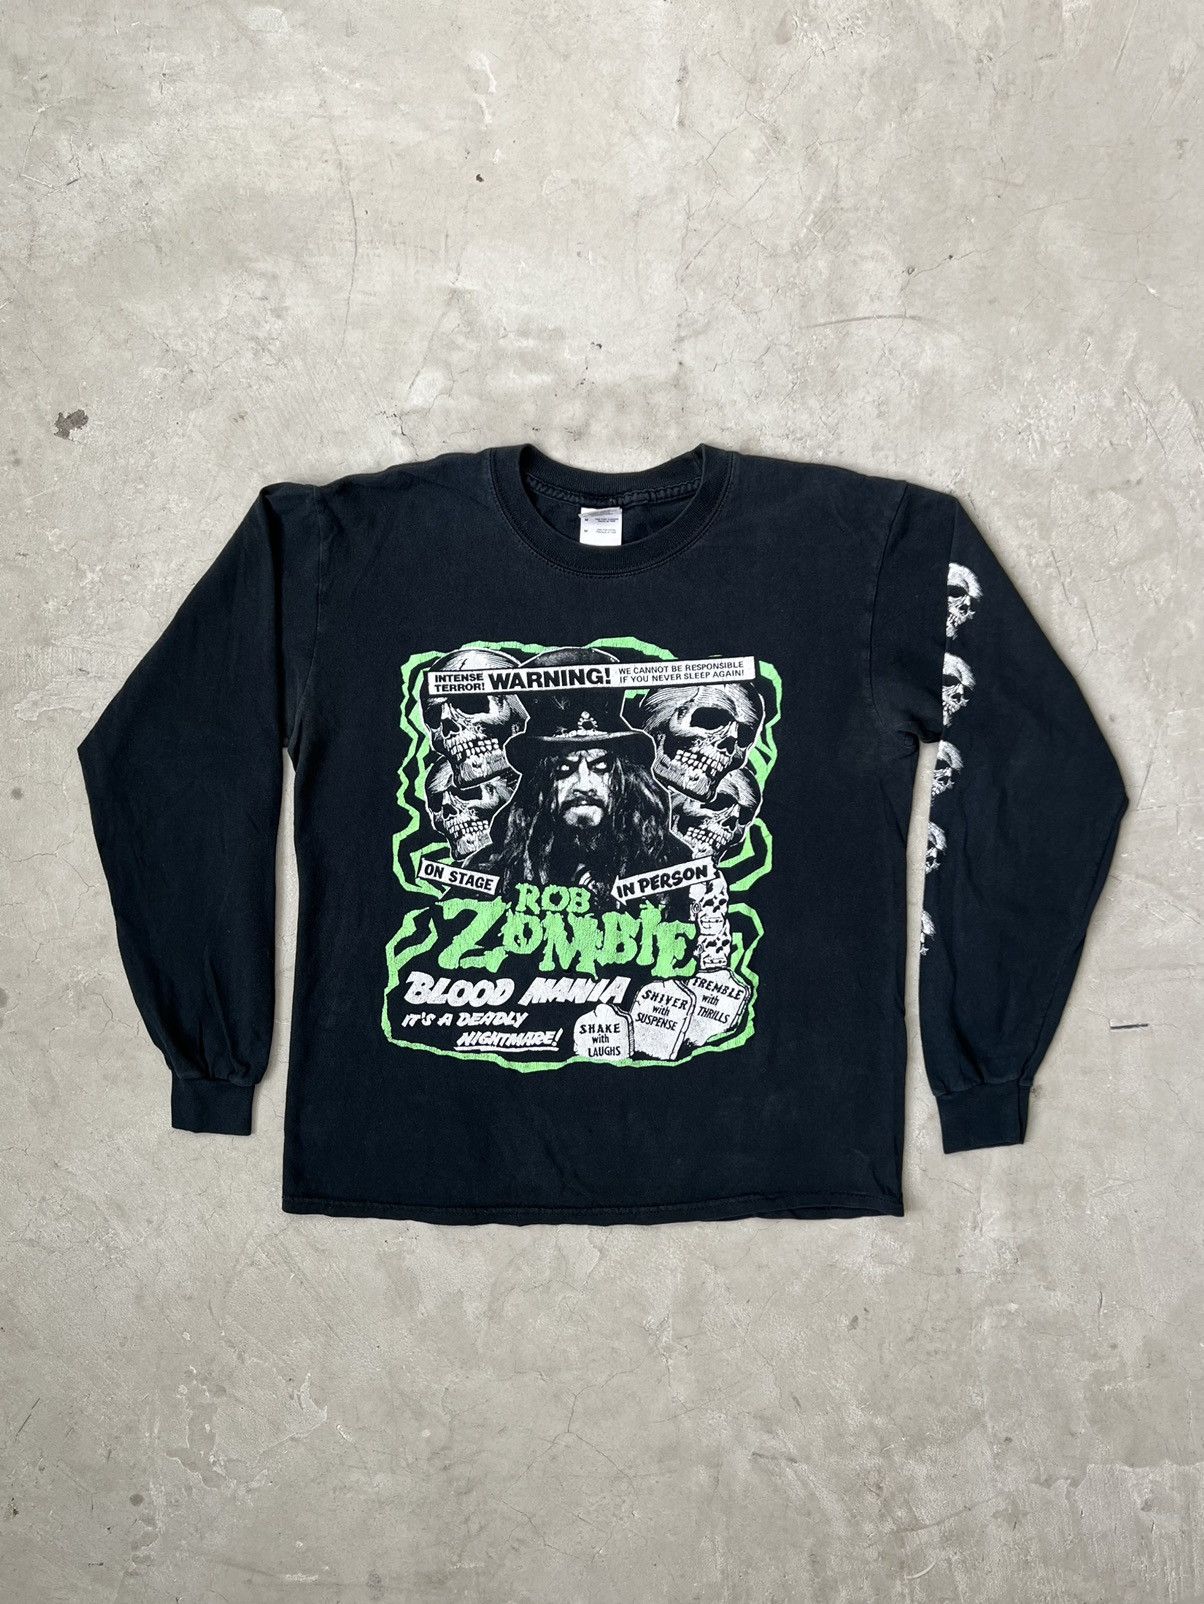 Vintage 90’s Rob Zombie Graphic Longsleeve Tee Size US M / EU 48-50 / 2 - 1 Preview